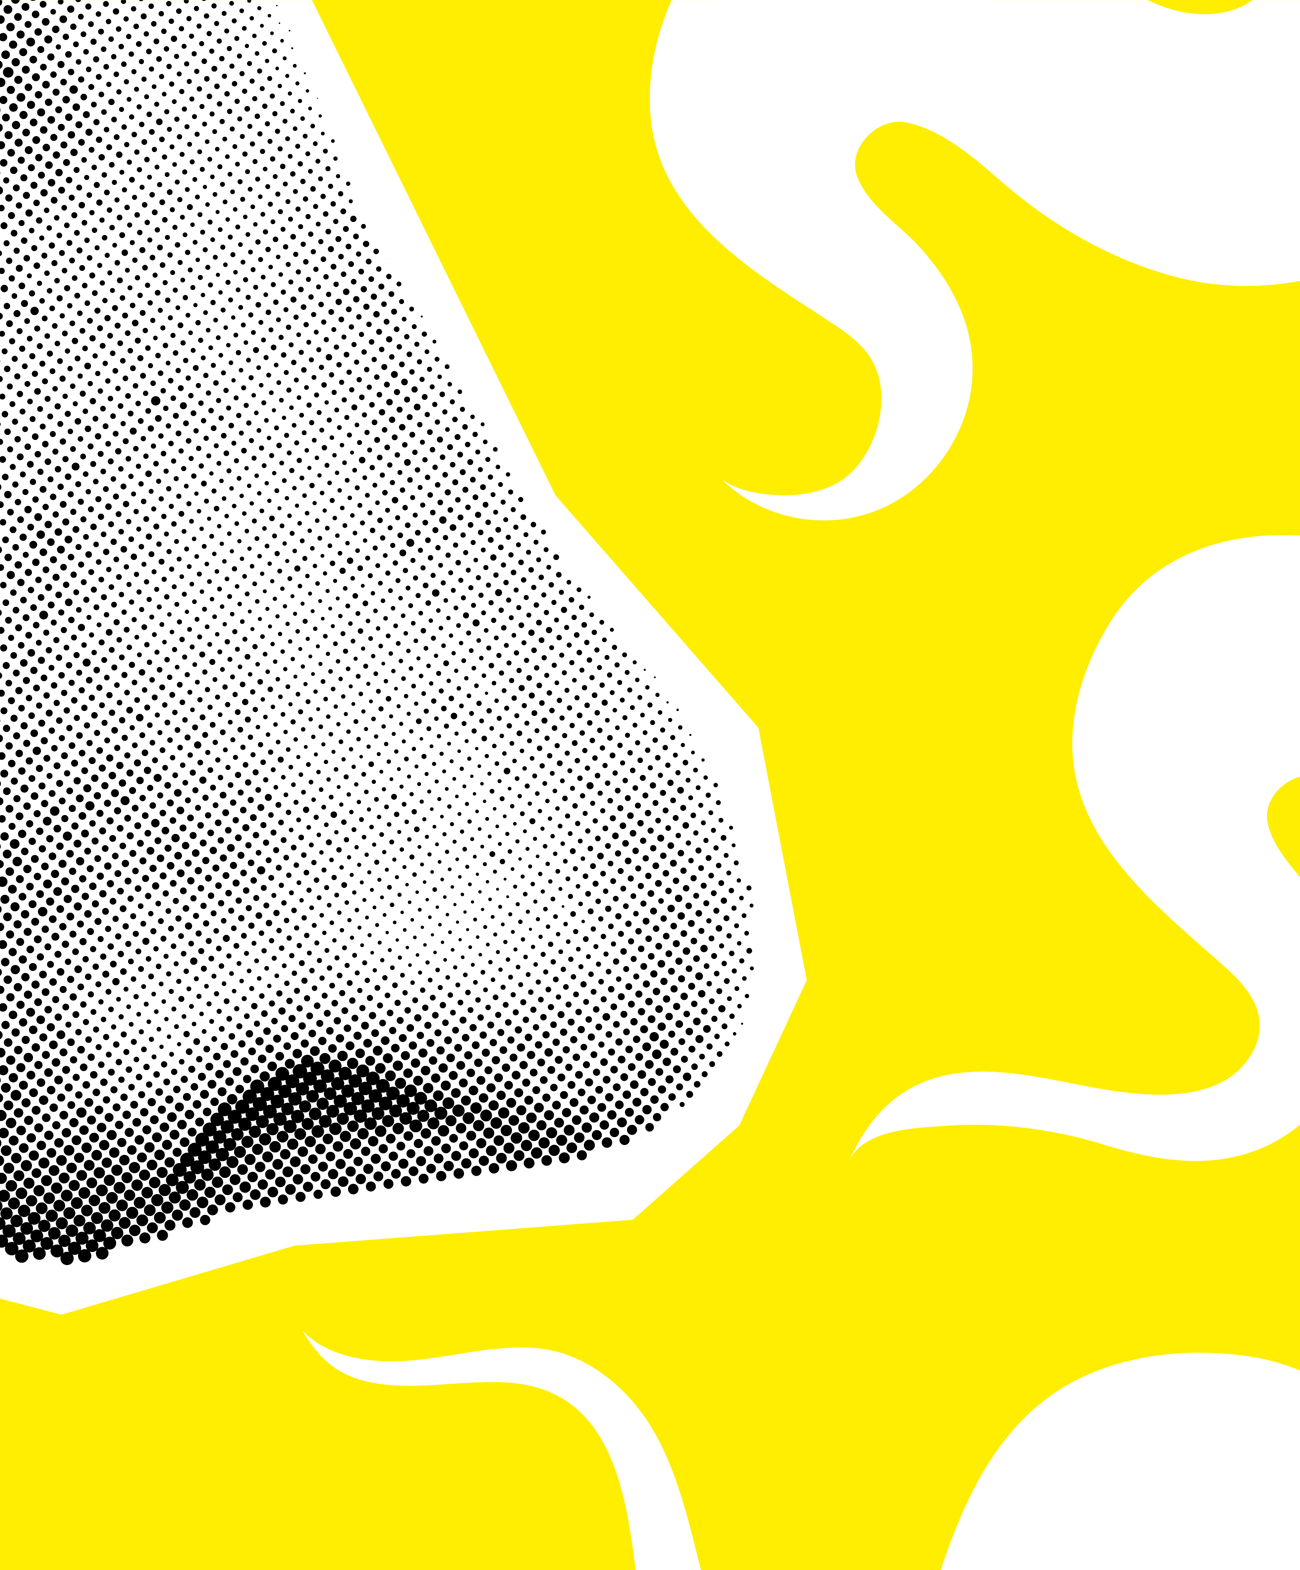 profile of a nose with illustrated "smells" wafting around it